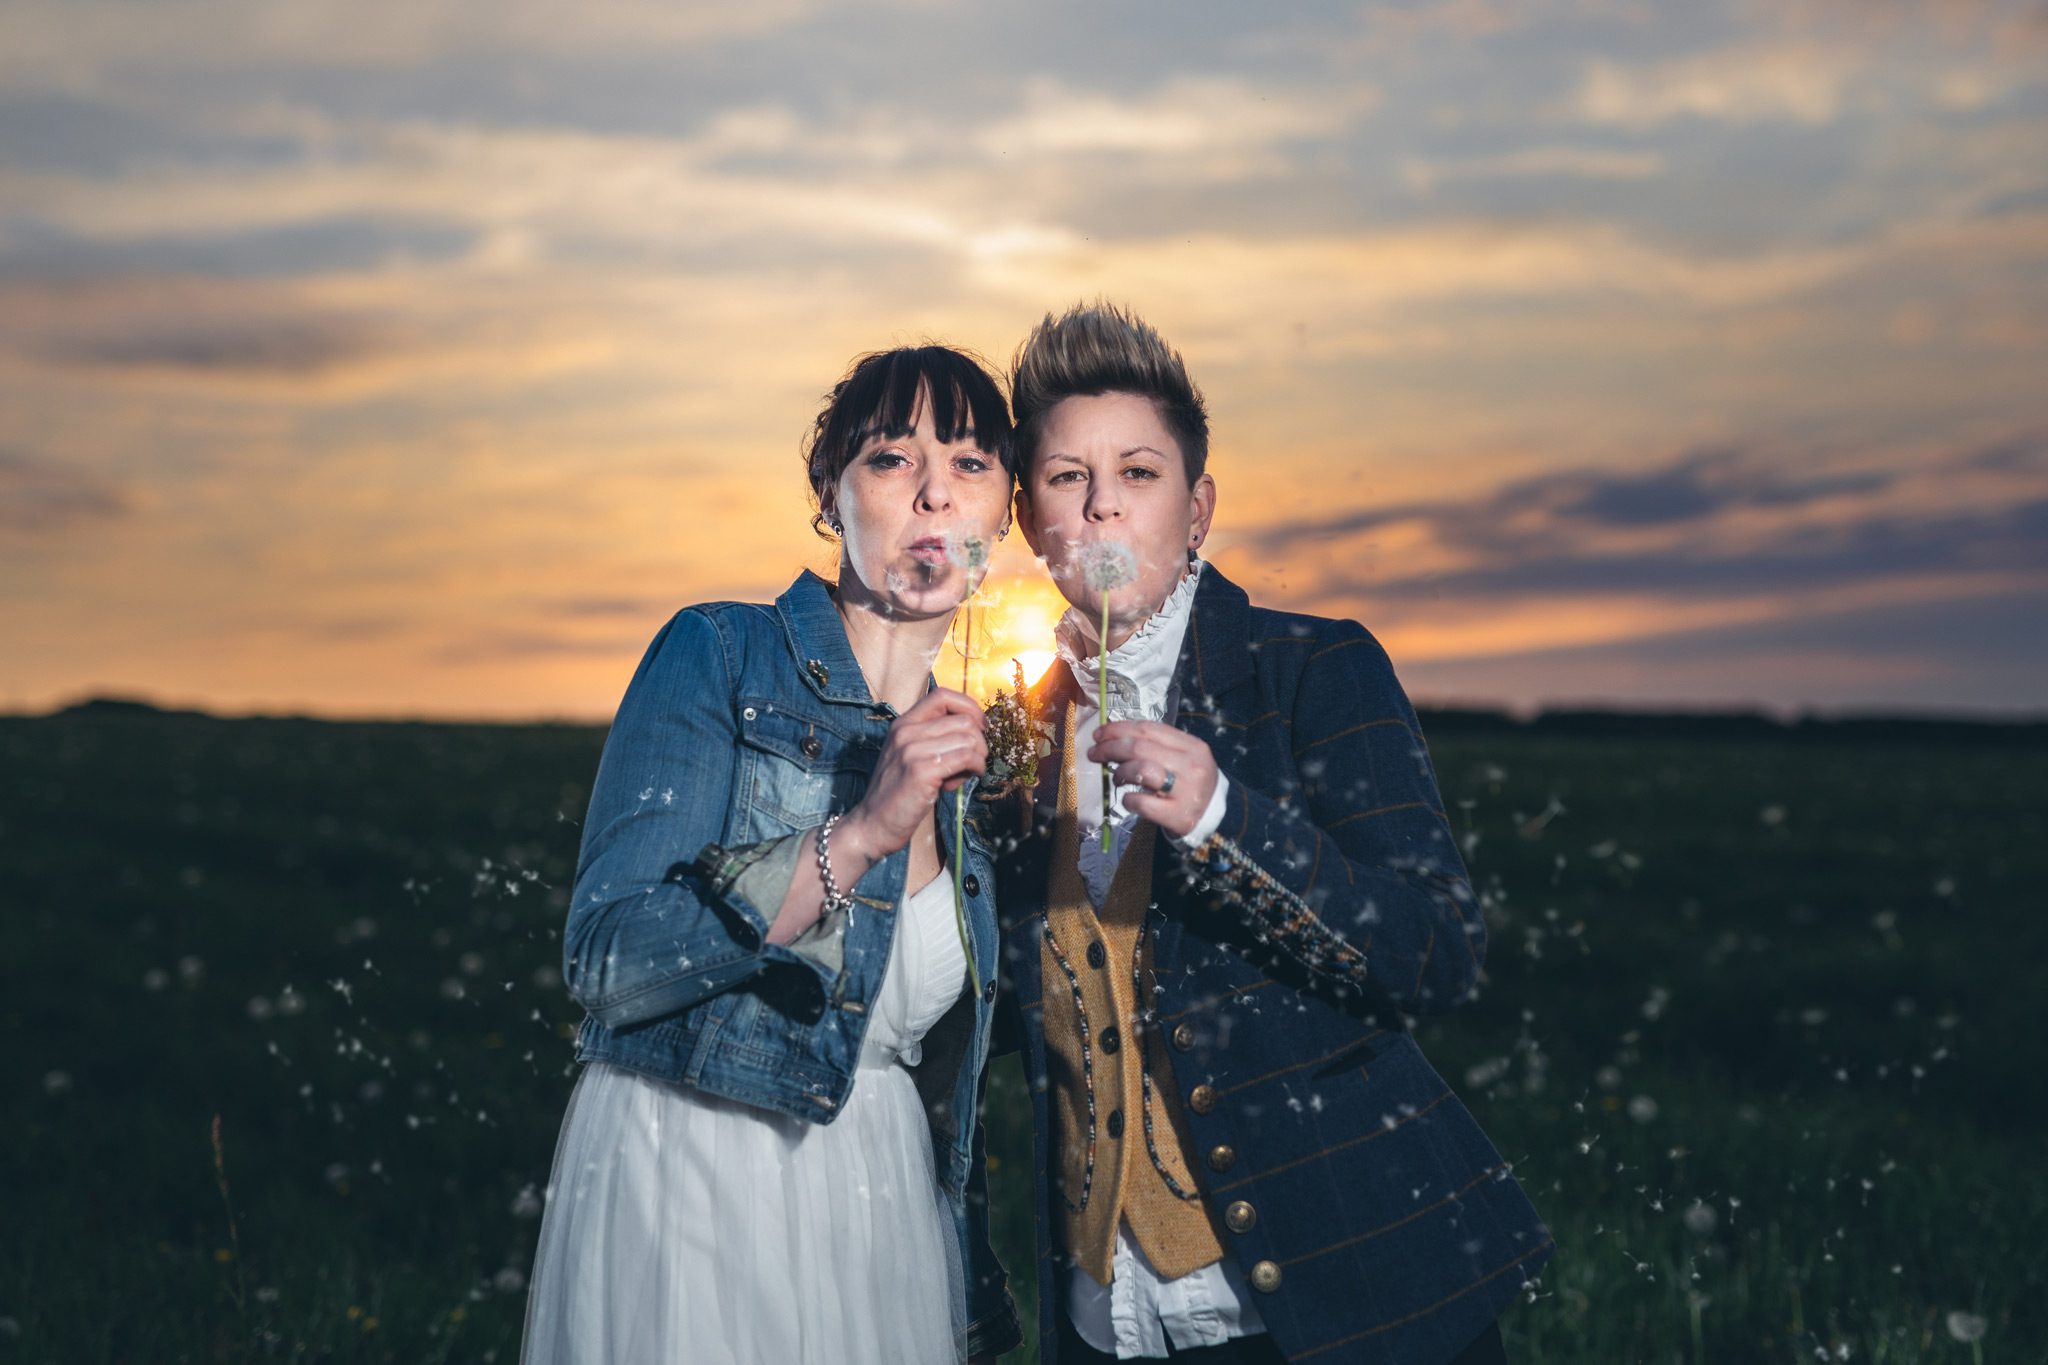 The couple blowing dandelion seeds